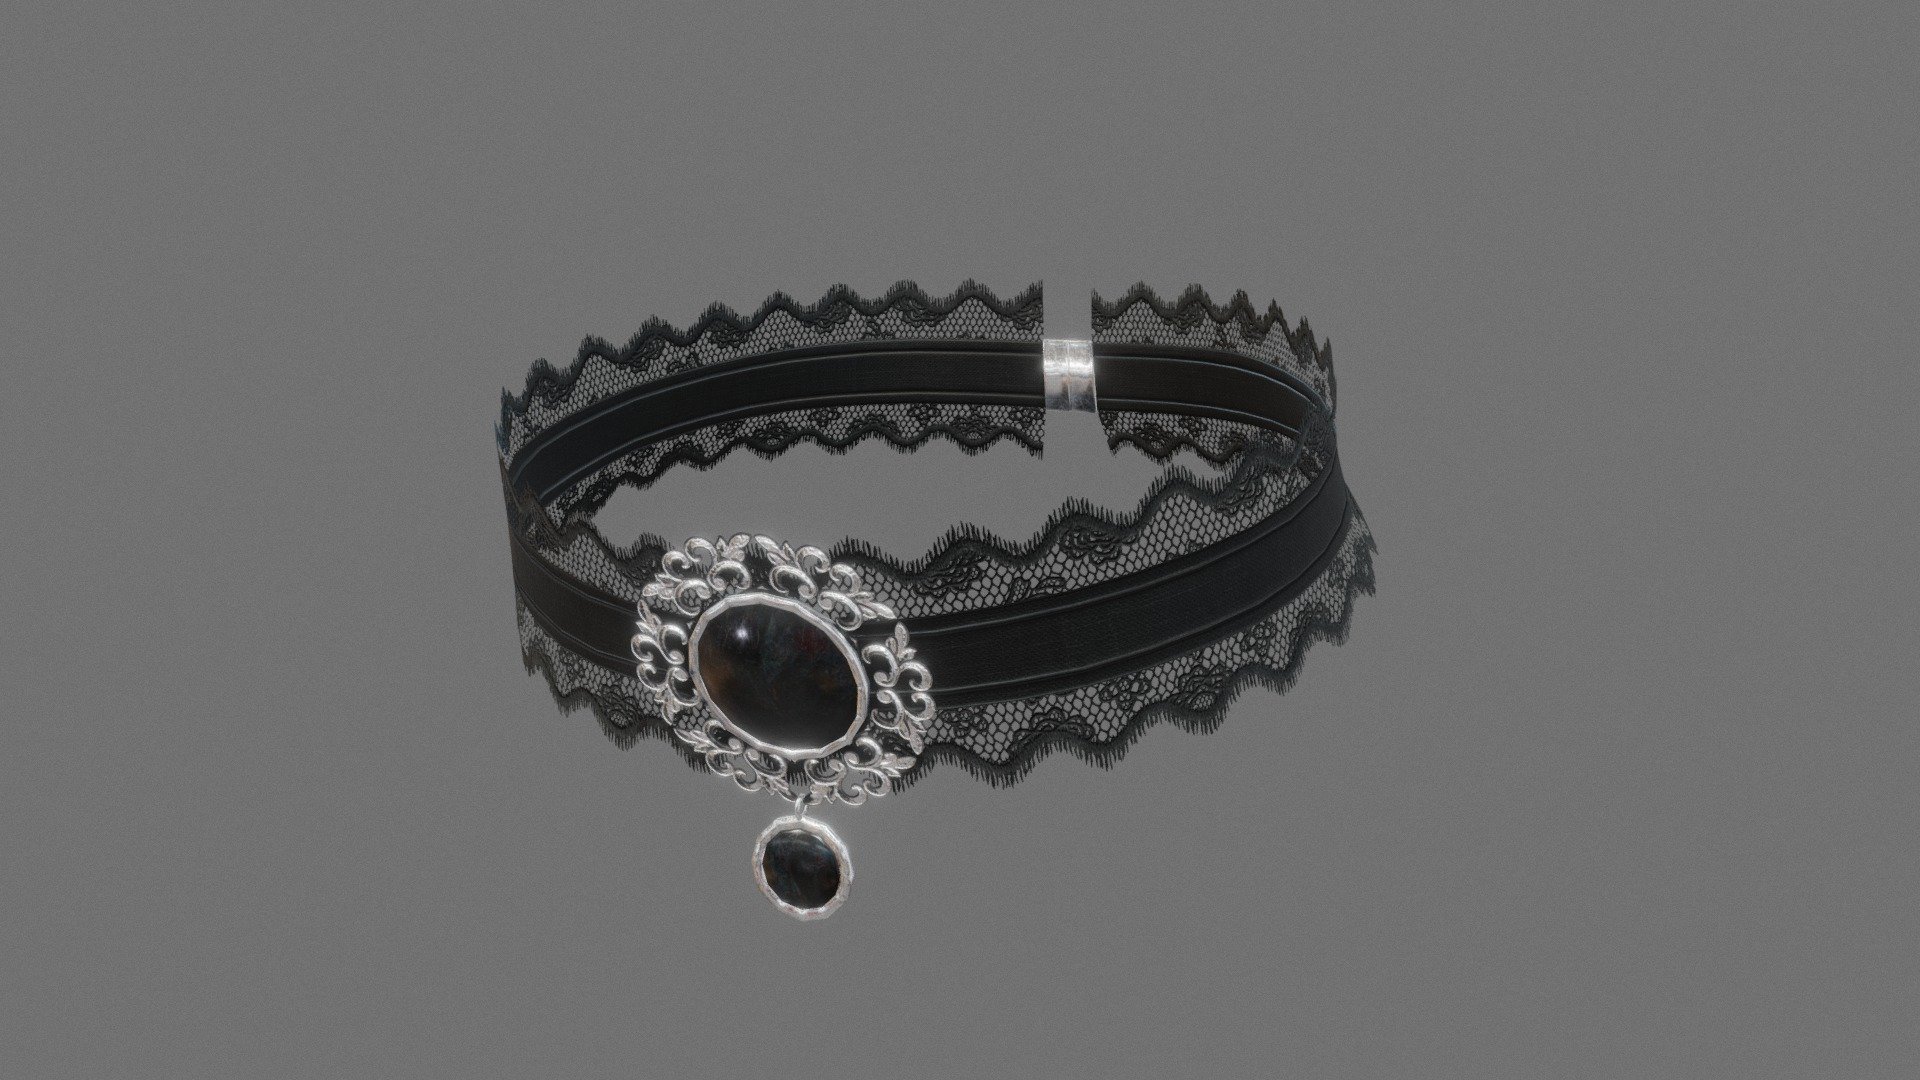 A victorian style choker, with laces and black gemstones.

Modelled in Blender to fit a Metahuman character and textured in Quixel Mixer.

4K maps: Albedo, Roughness, Metalness, Ambient Occlusion and Opacity Mask.

Formats: .fbx and .obj - Victorian Lace Choker - Buy Royalty Free 3D model by Anskar 3d model